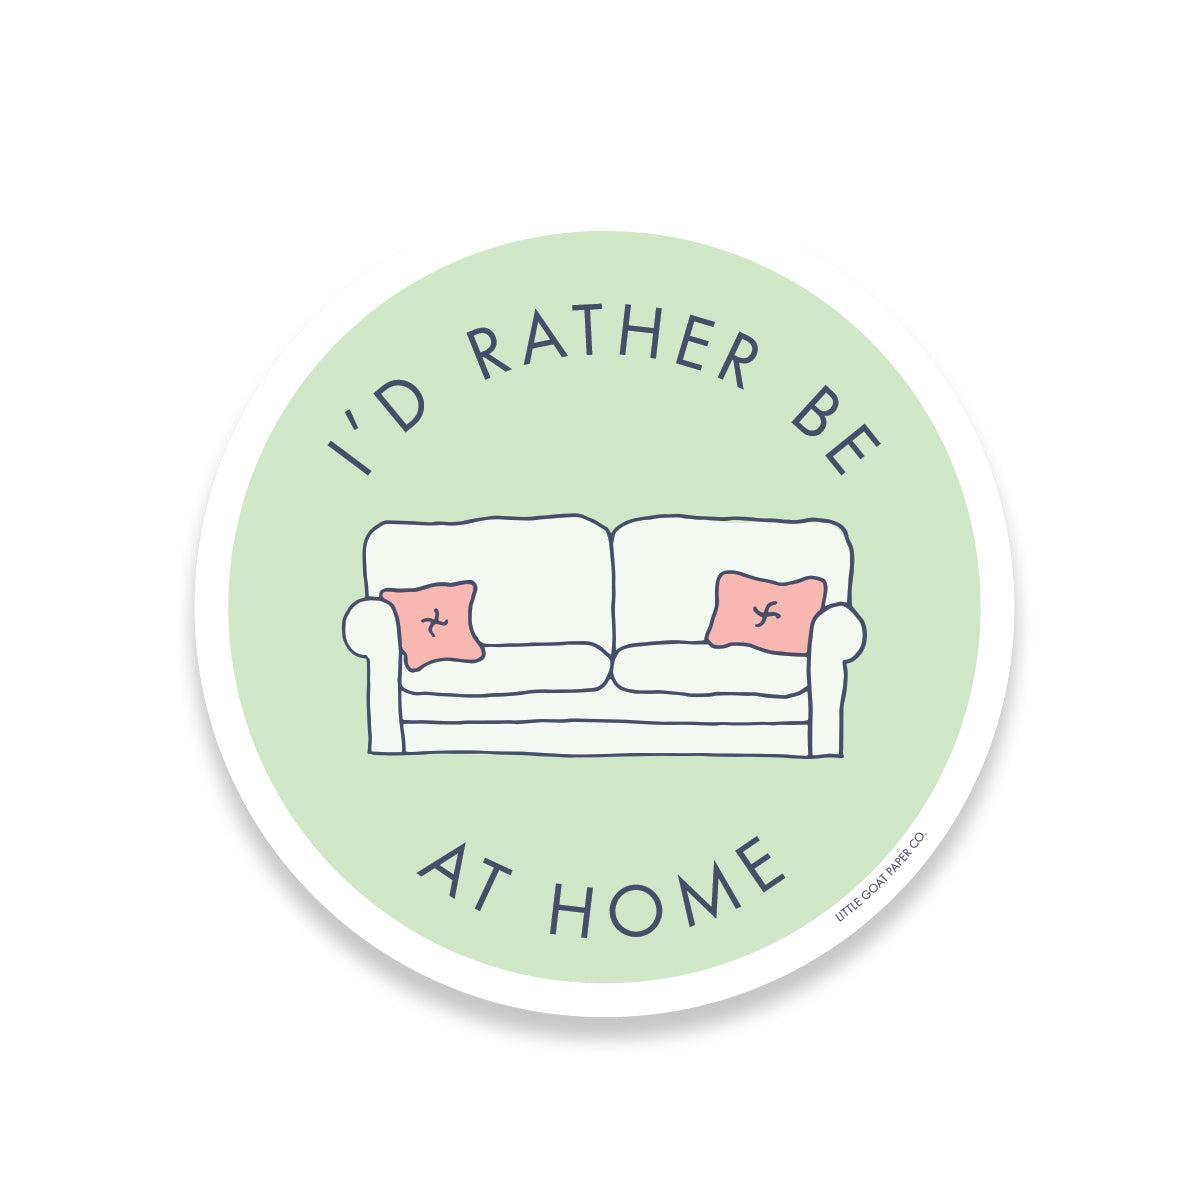 I'd Rather Be at Home Sticker